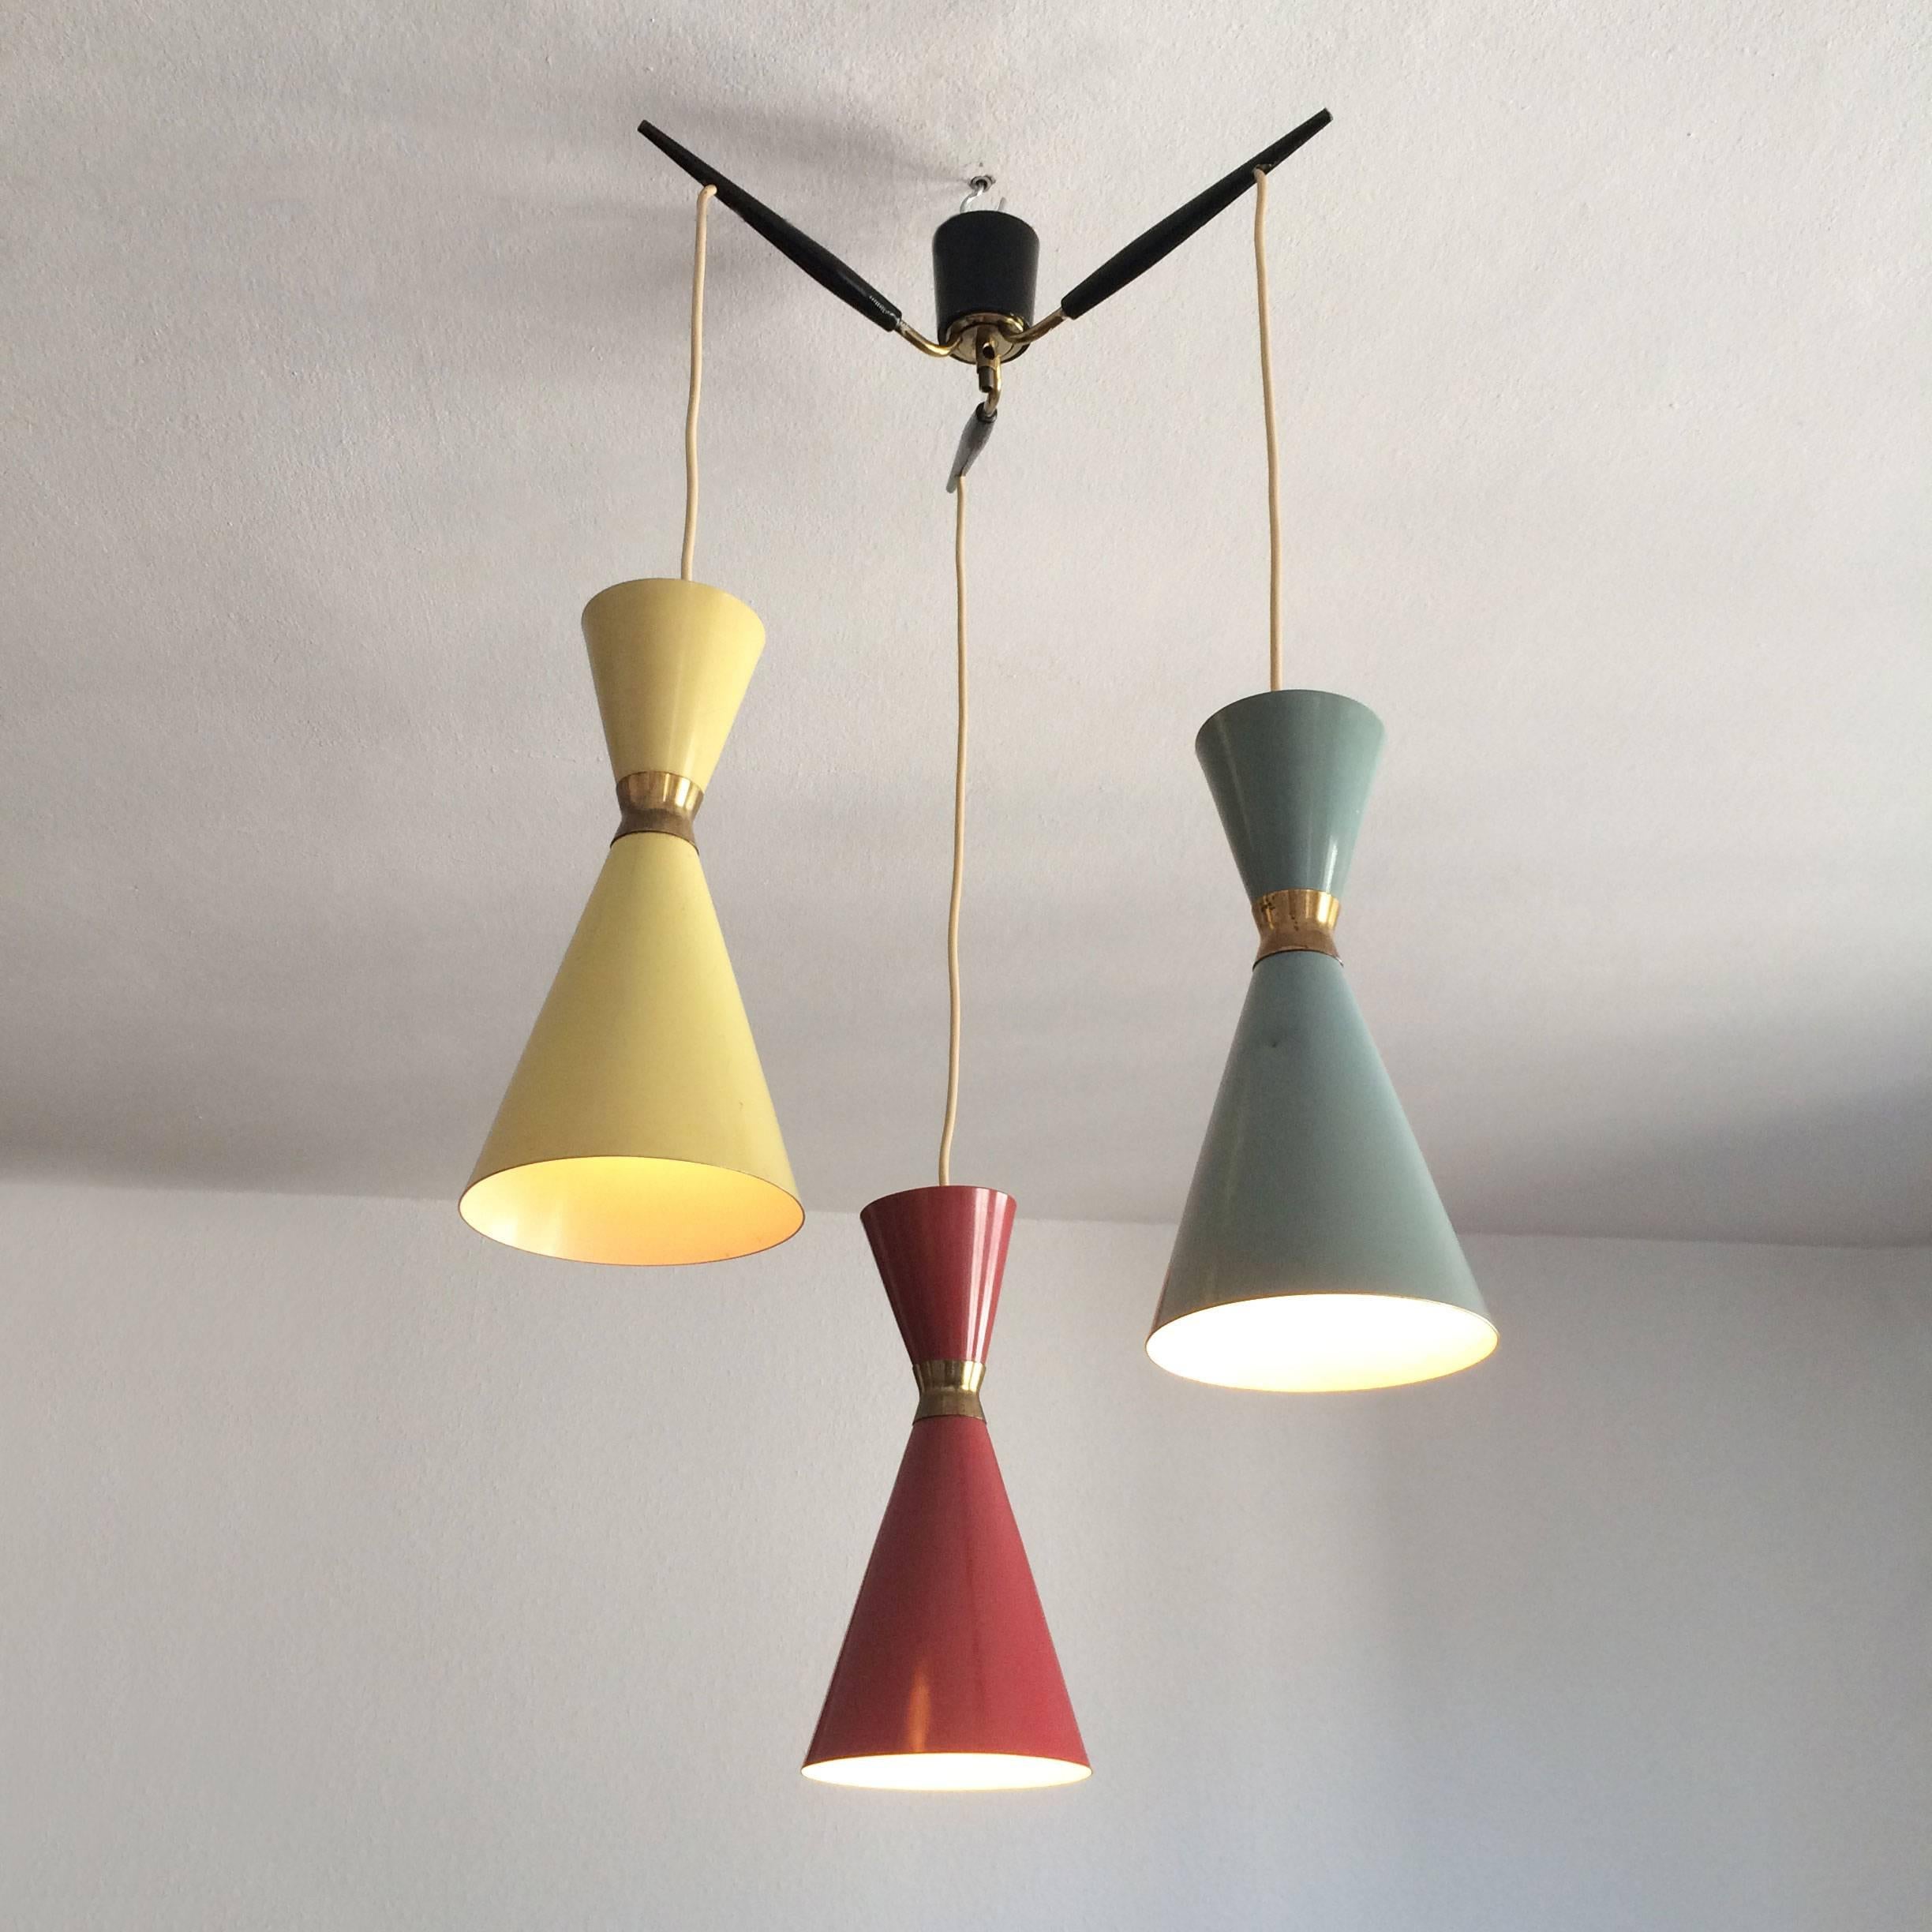 Polychrome pendant lamp with green, red, yellow colored diabolo shades. Manufactured by Bünte & Remmler, Germany in 1950s. Each shade is executed with one E14 screw fit bulb.